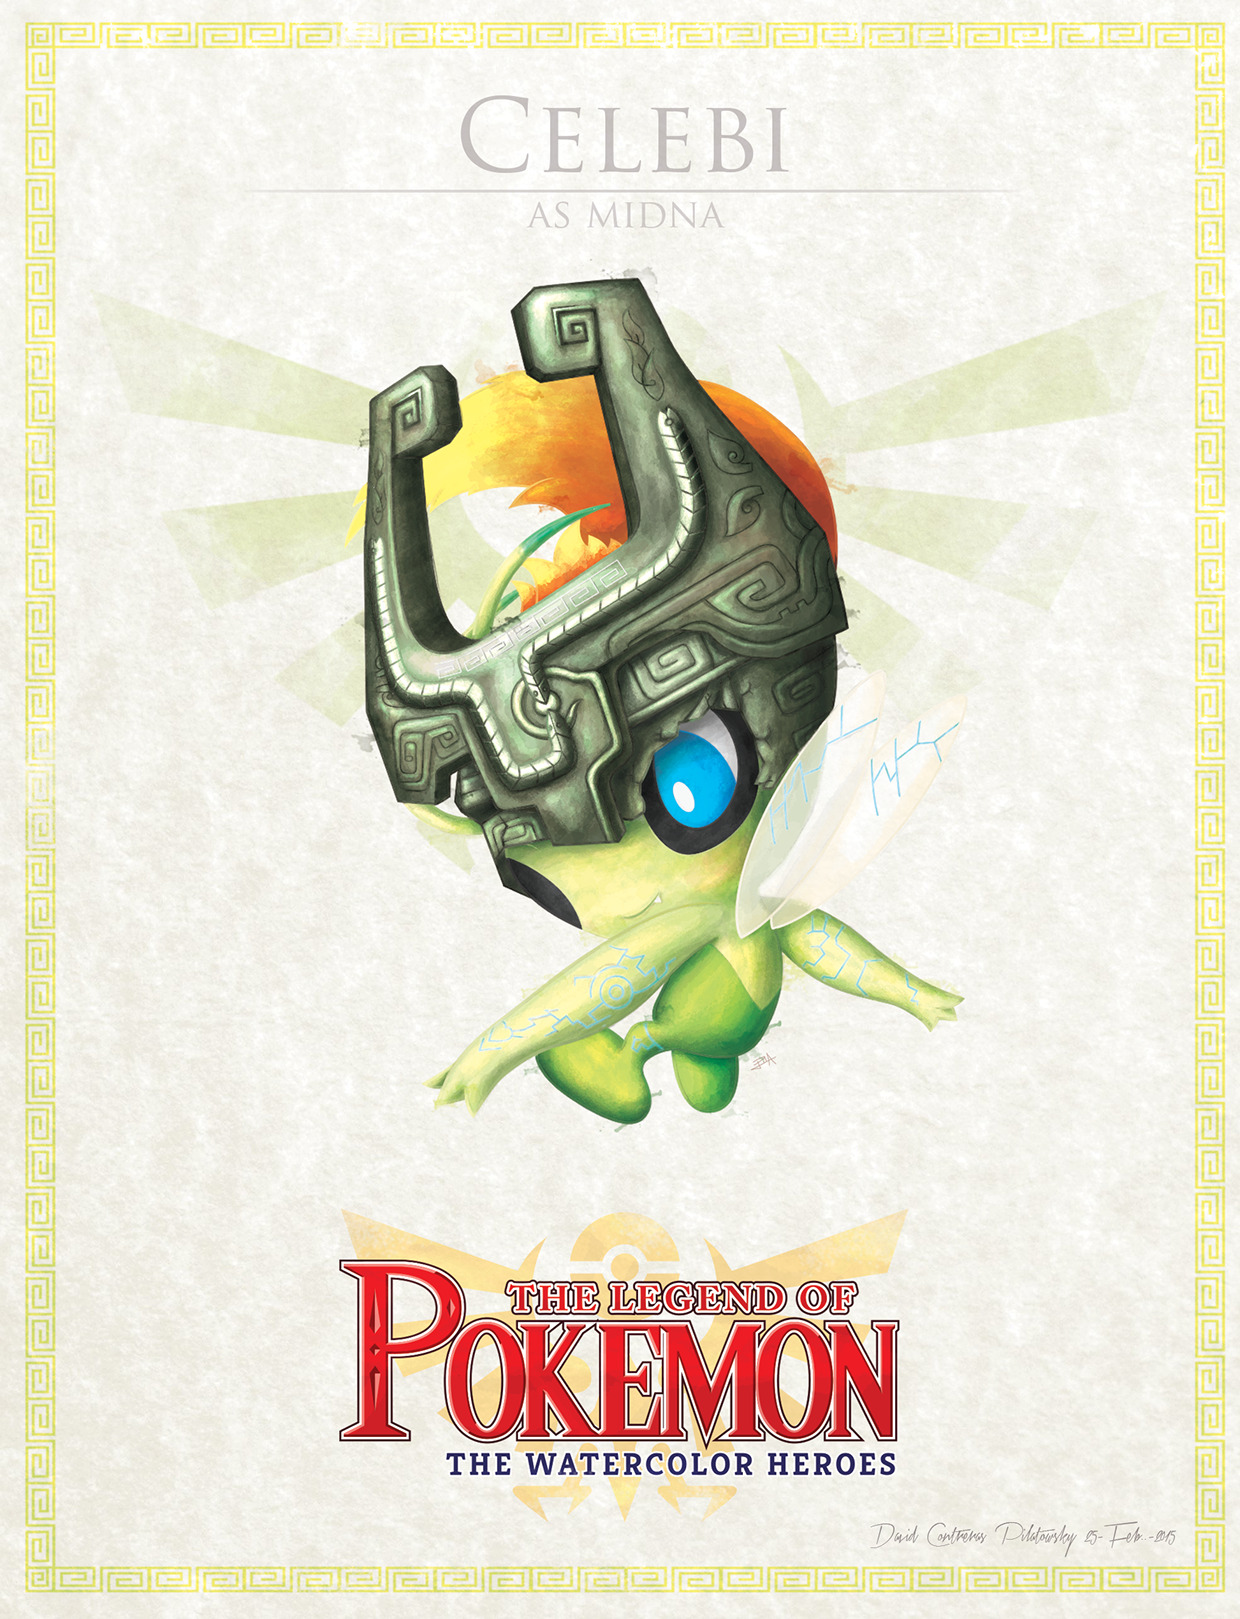 pixalry:  The Legend of Pokemon Part II - Created by David PilatowskyCheck out Part